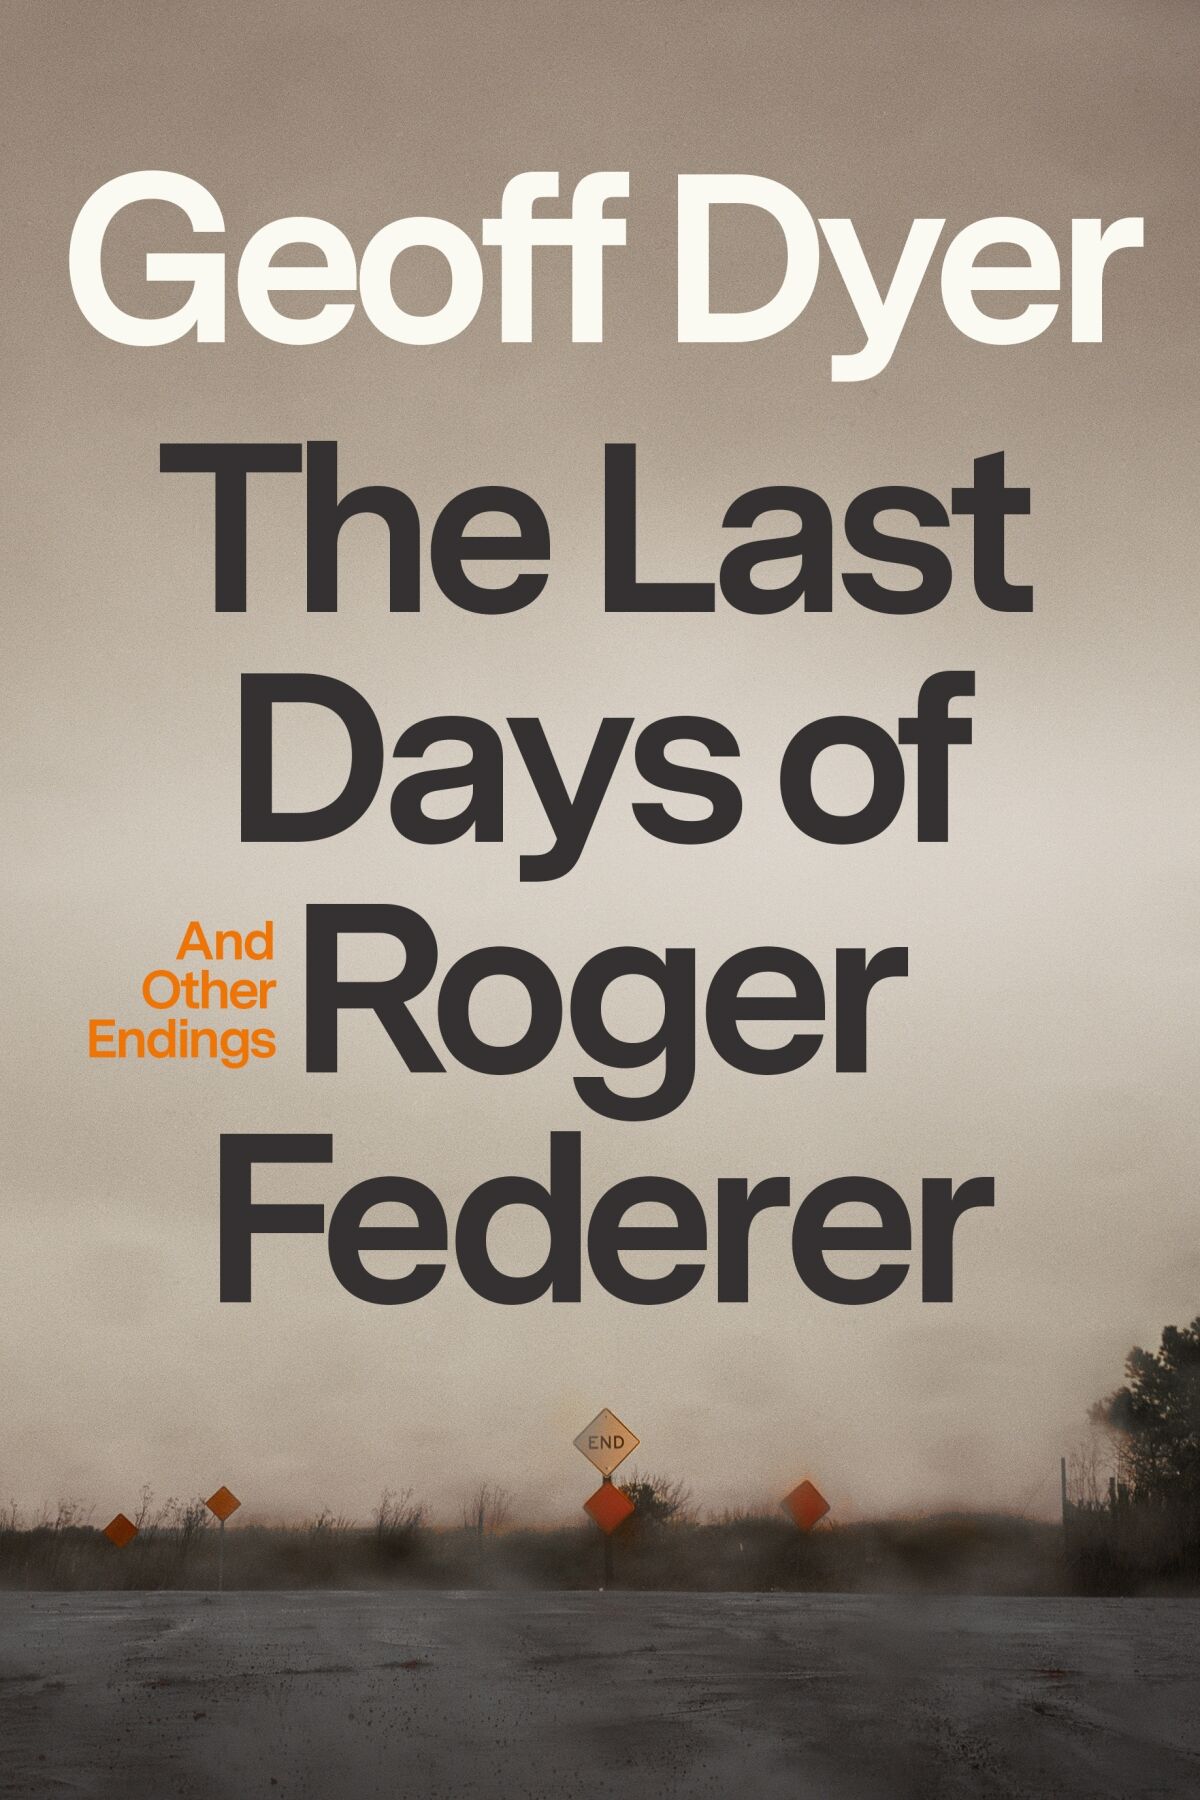 "The Last Days of Roger Federer: And Other Endings" by Guy Drayton